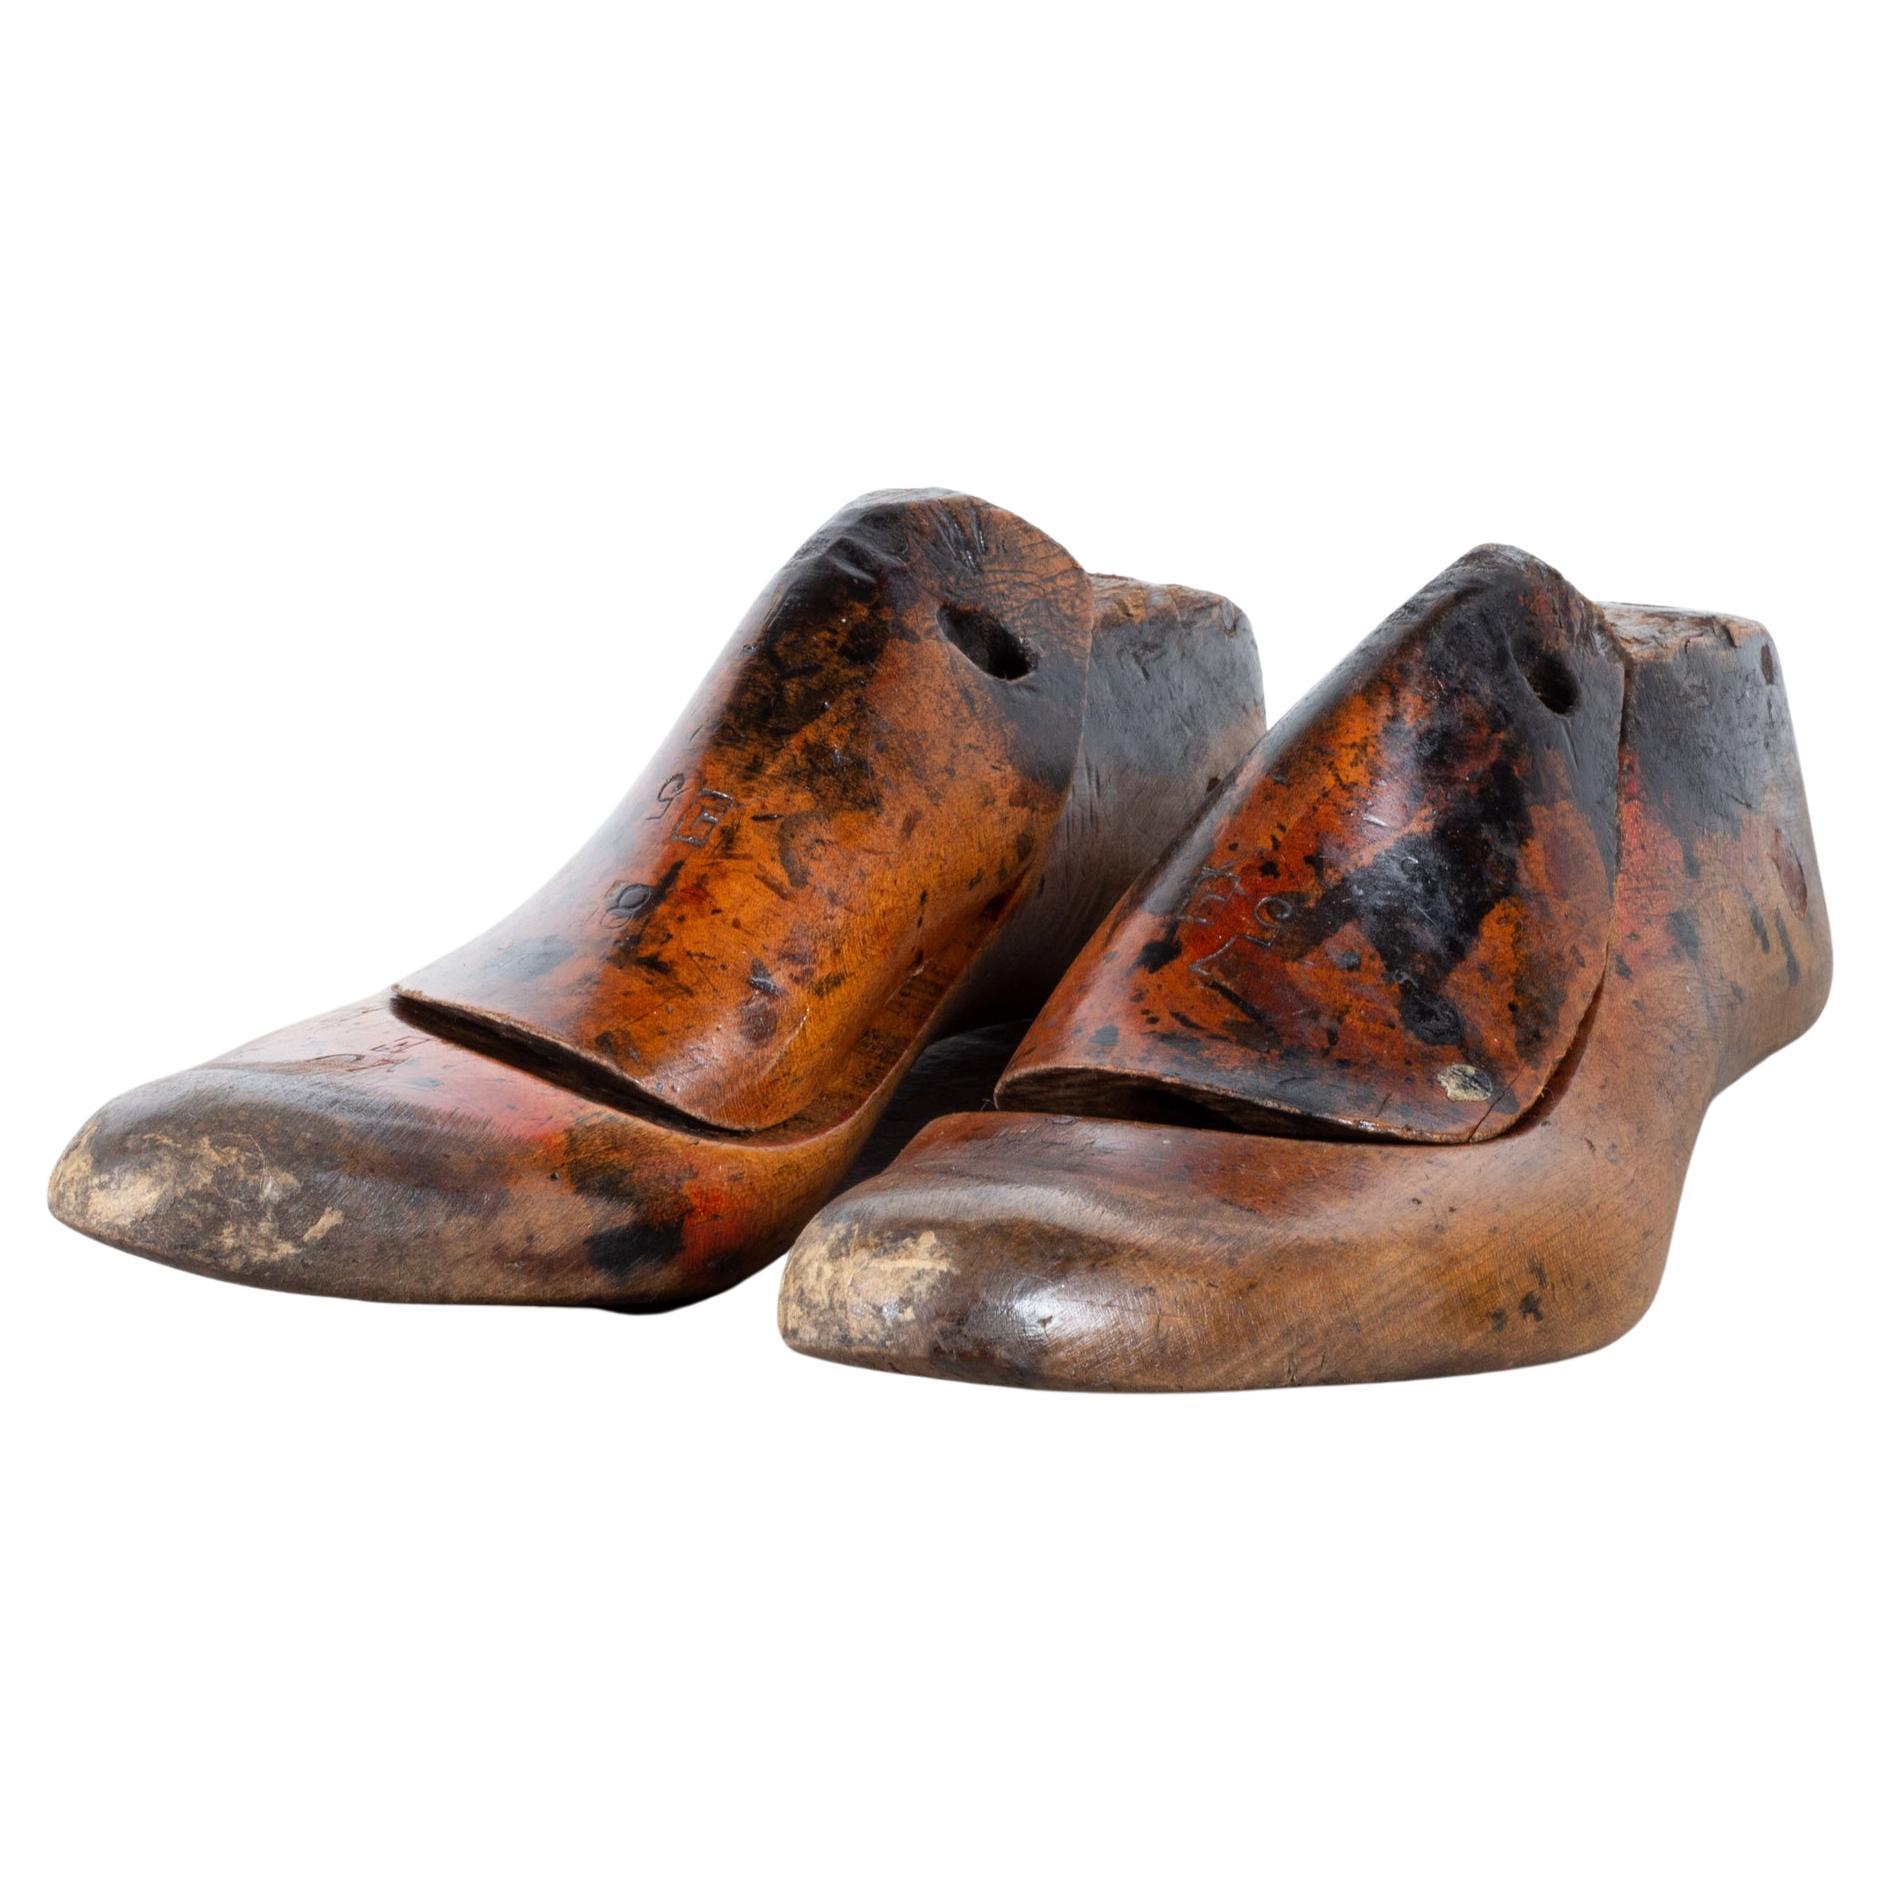 ﻿ABOUT

Price is per pair. Decorative only. Sizes unknown. Please specify which pair you would like. 

Original pairs of cobbler's wooden shoe lasts. Refinished and shellacked.

    CREATOR Unknown.
    DATE OF MANUFACTURE c.1920
    MATERIALS AND